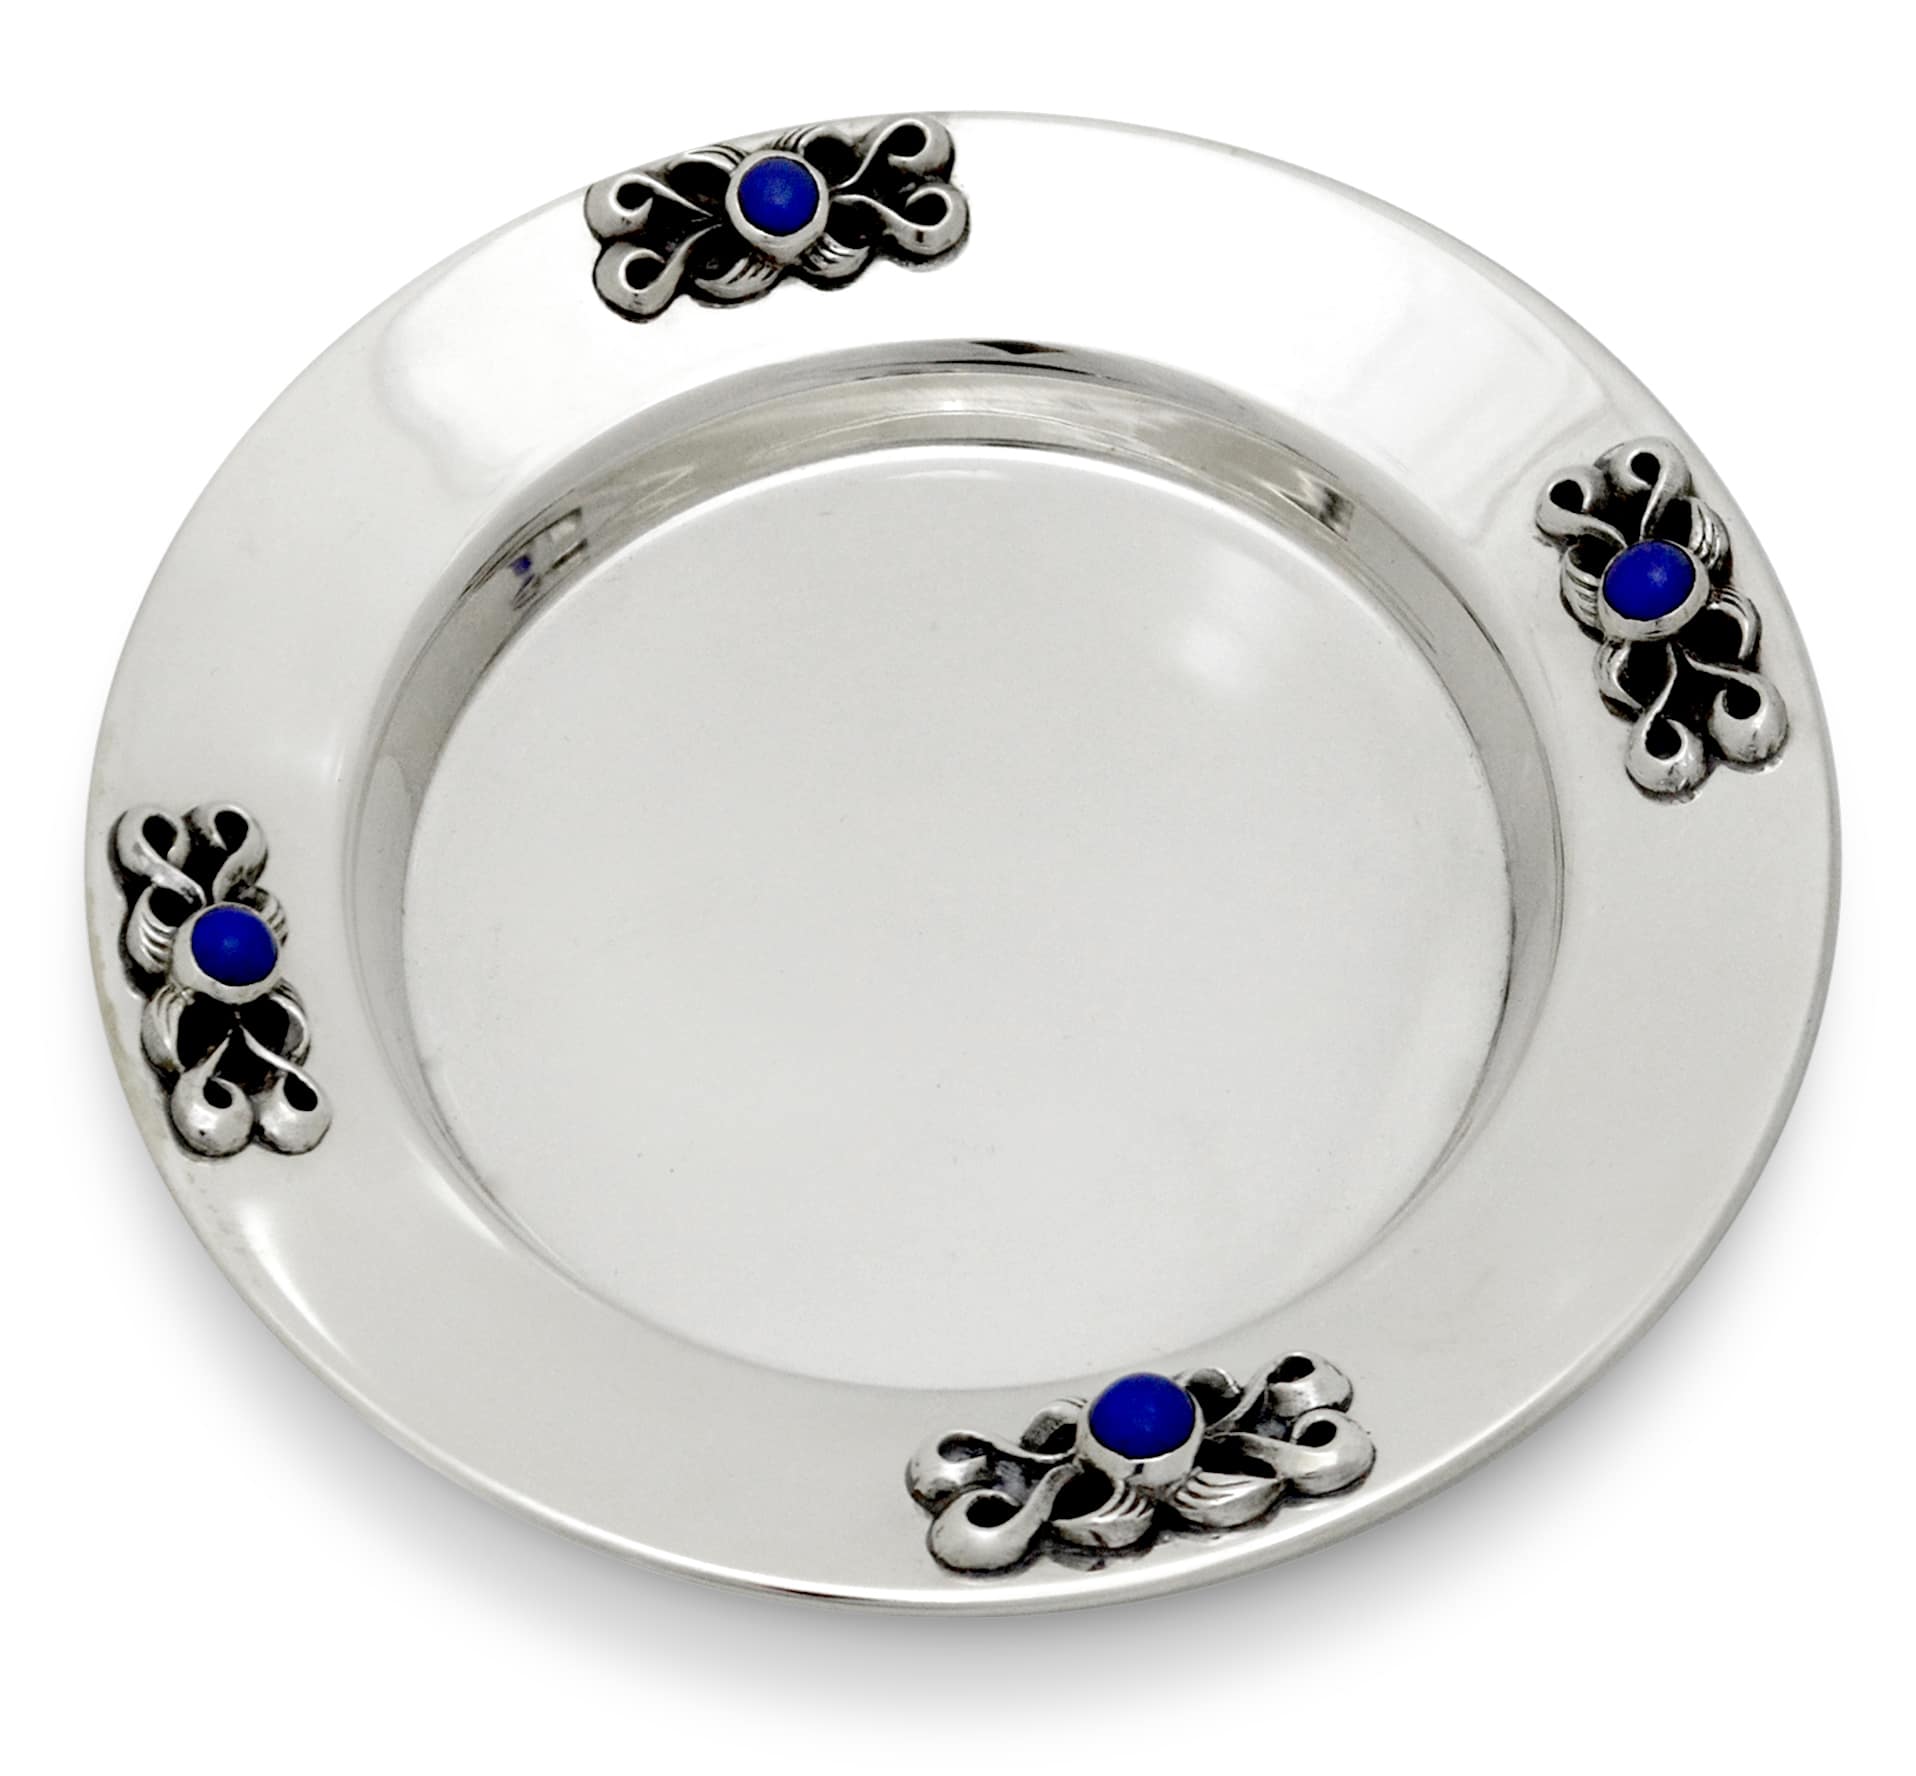 Floral Sterling Silver Plate with Natural Lapis Lazuli Stones